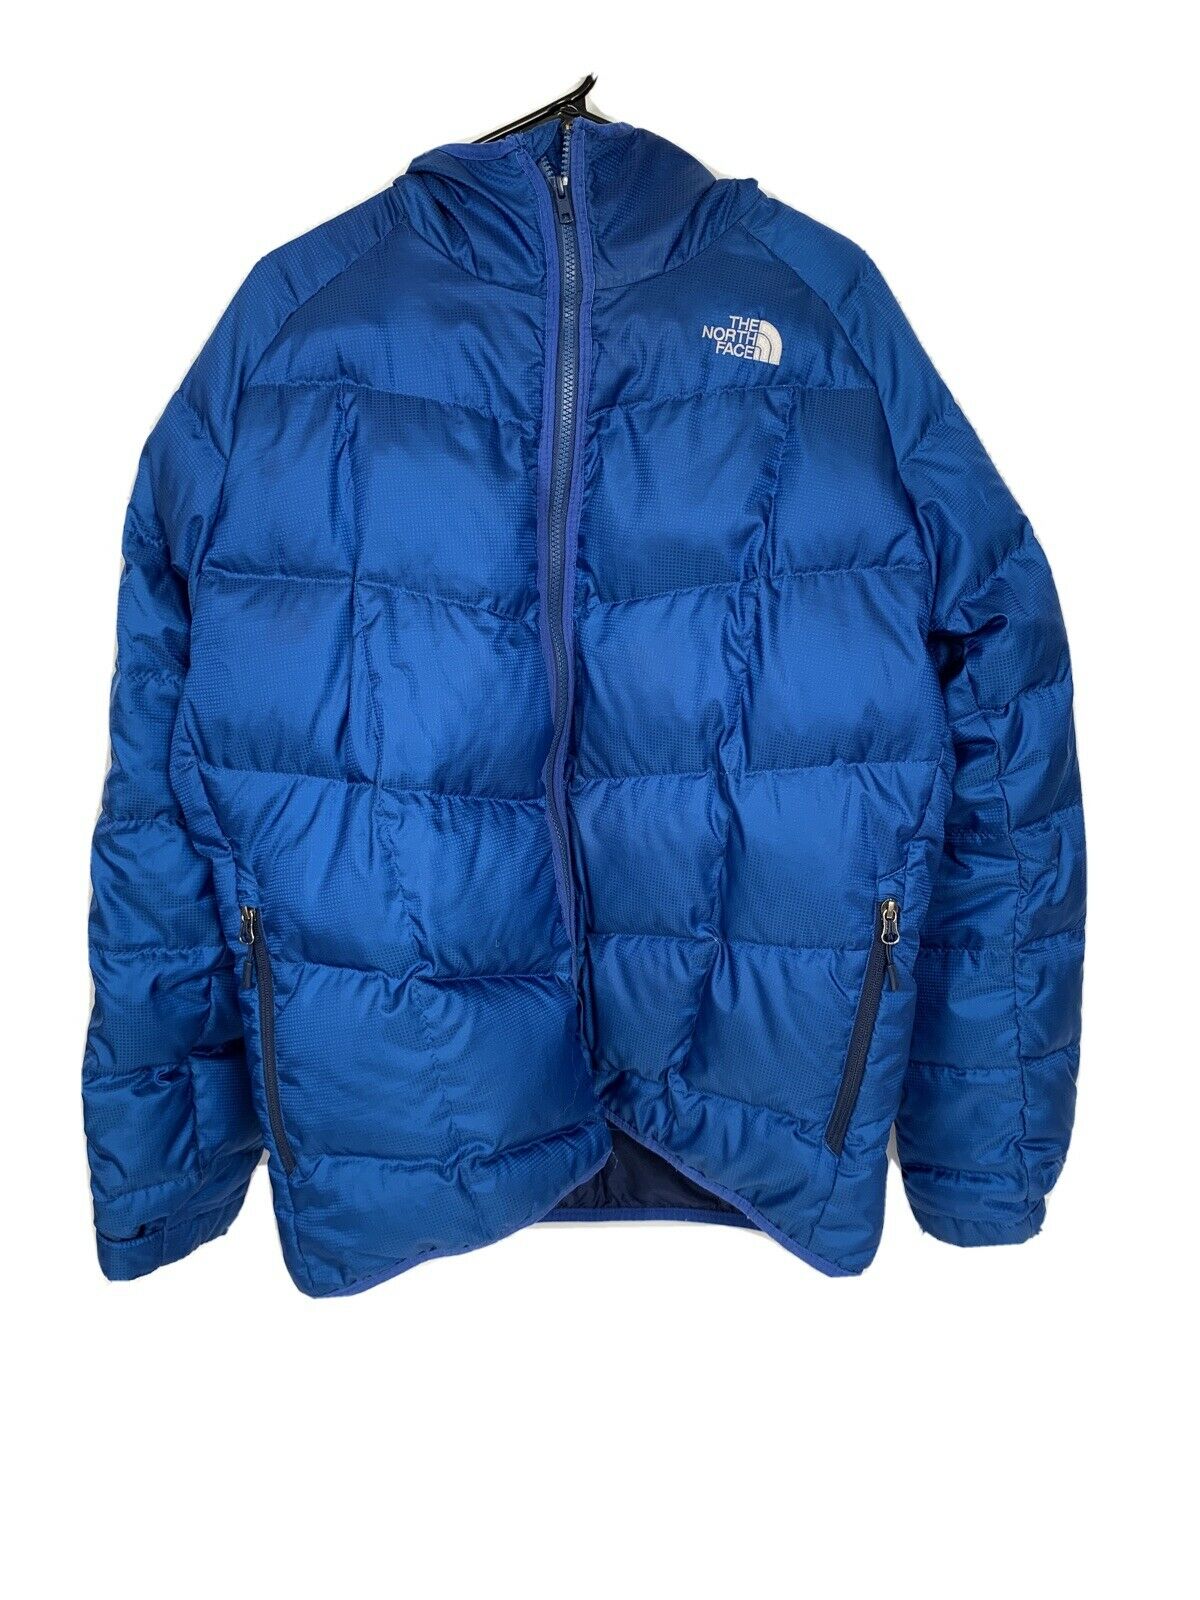 the north face 500 jacket